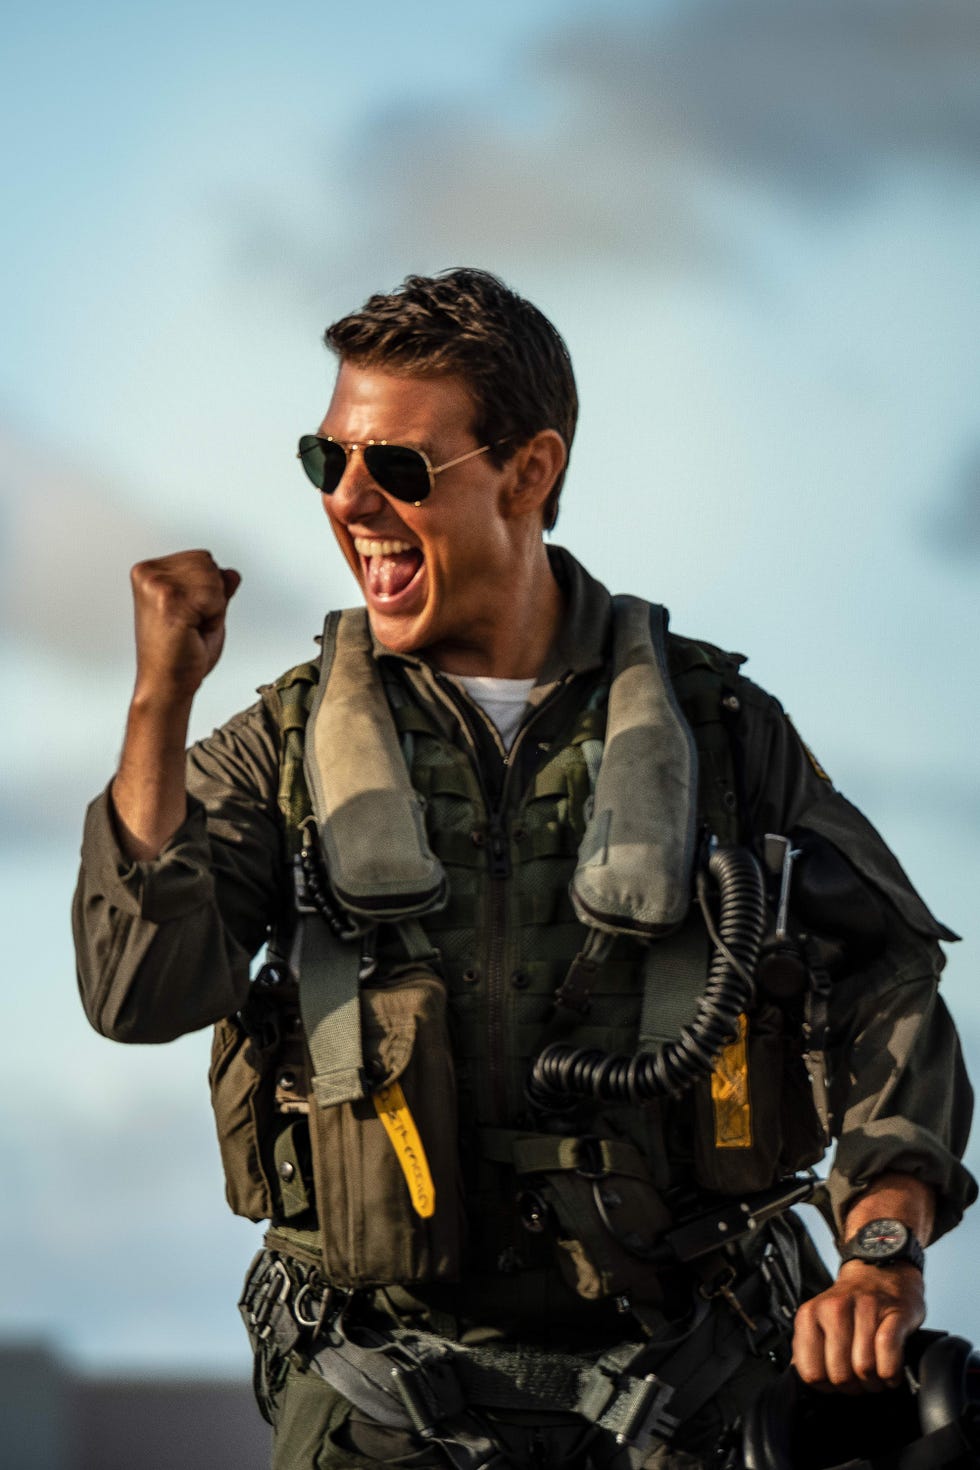 Top Gun: Maverick has hardcore Easter egg you might have missed